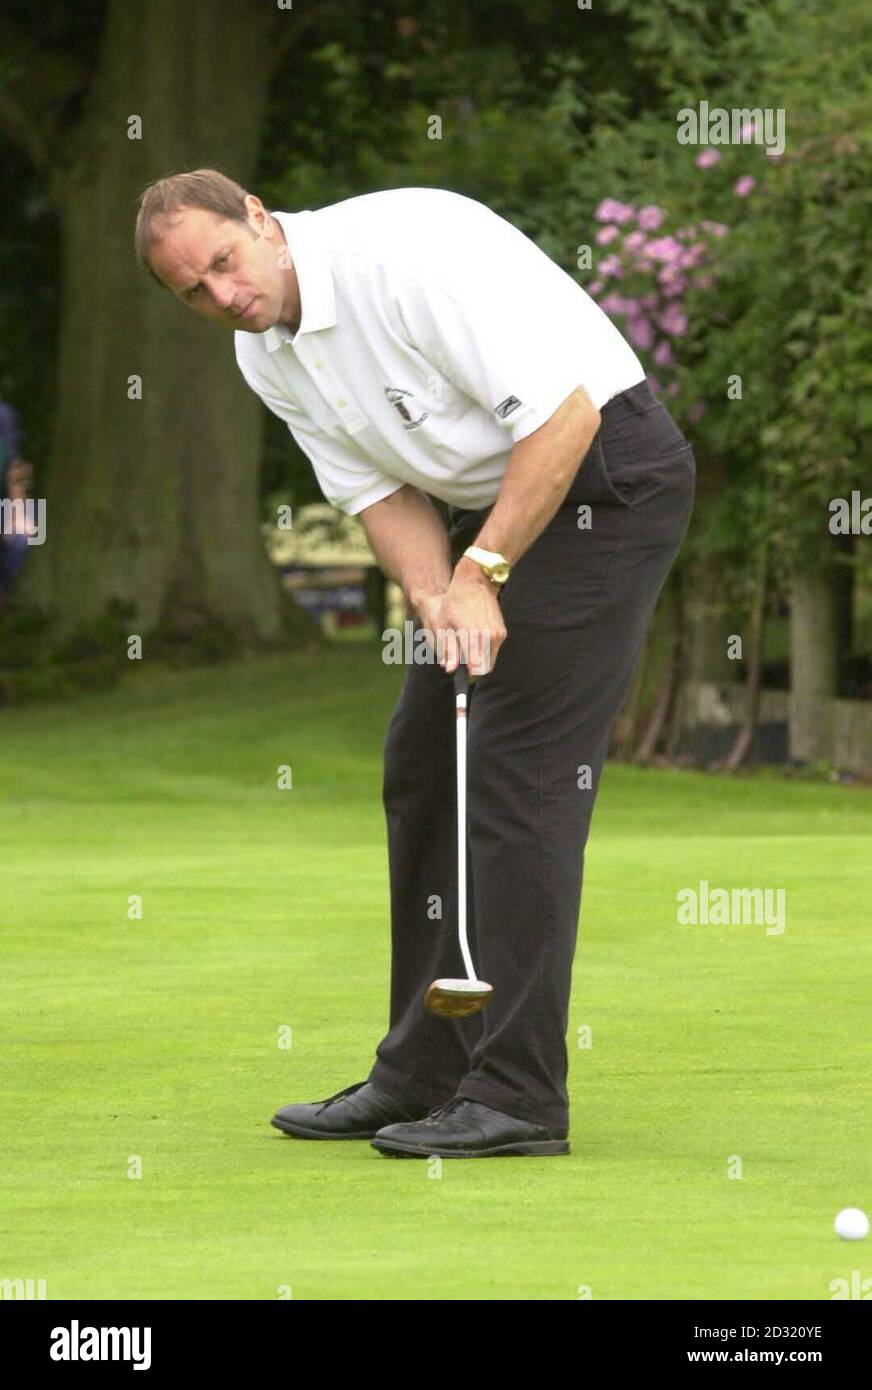 British Olympic rowing multiple gold medallist Sir Steve Redgrave at the Hayleyford Golf Club in Marlow for a celebrity golf day to raise money for SPARKS (SPort Aiding medical Research for KidS).  30/07/02 : Hollywood heart-throb Dougray Scott and Olympic rowing hero Sir  Steve Redgrave were joining forces today - to play golf for charity.  The celebrities were hoping to play 72 holes of golf at four courses in less than 17 hours in a tournament to raise money for a number of UK charities.  Stock Photo